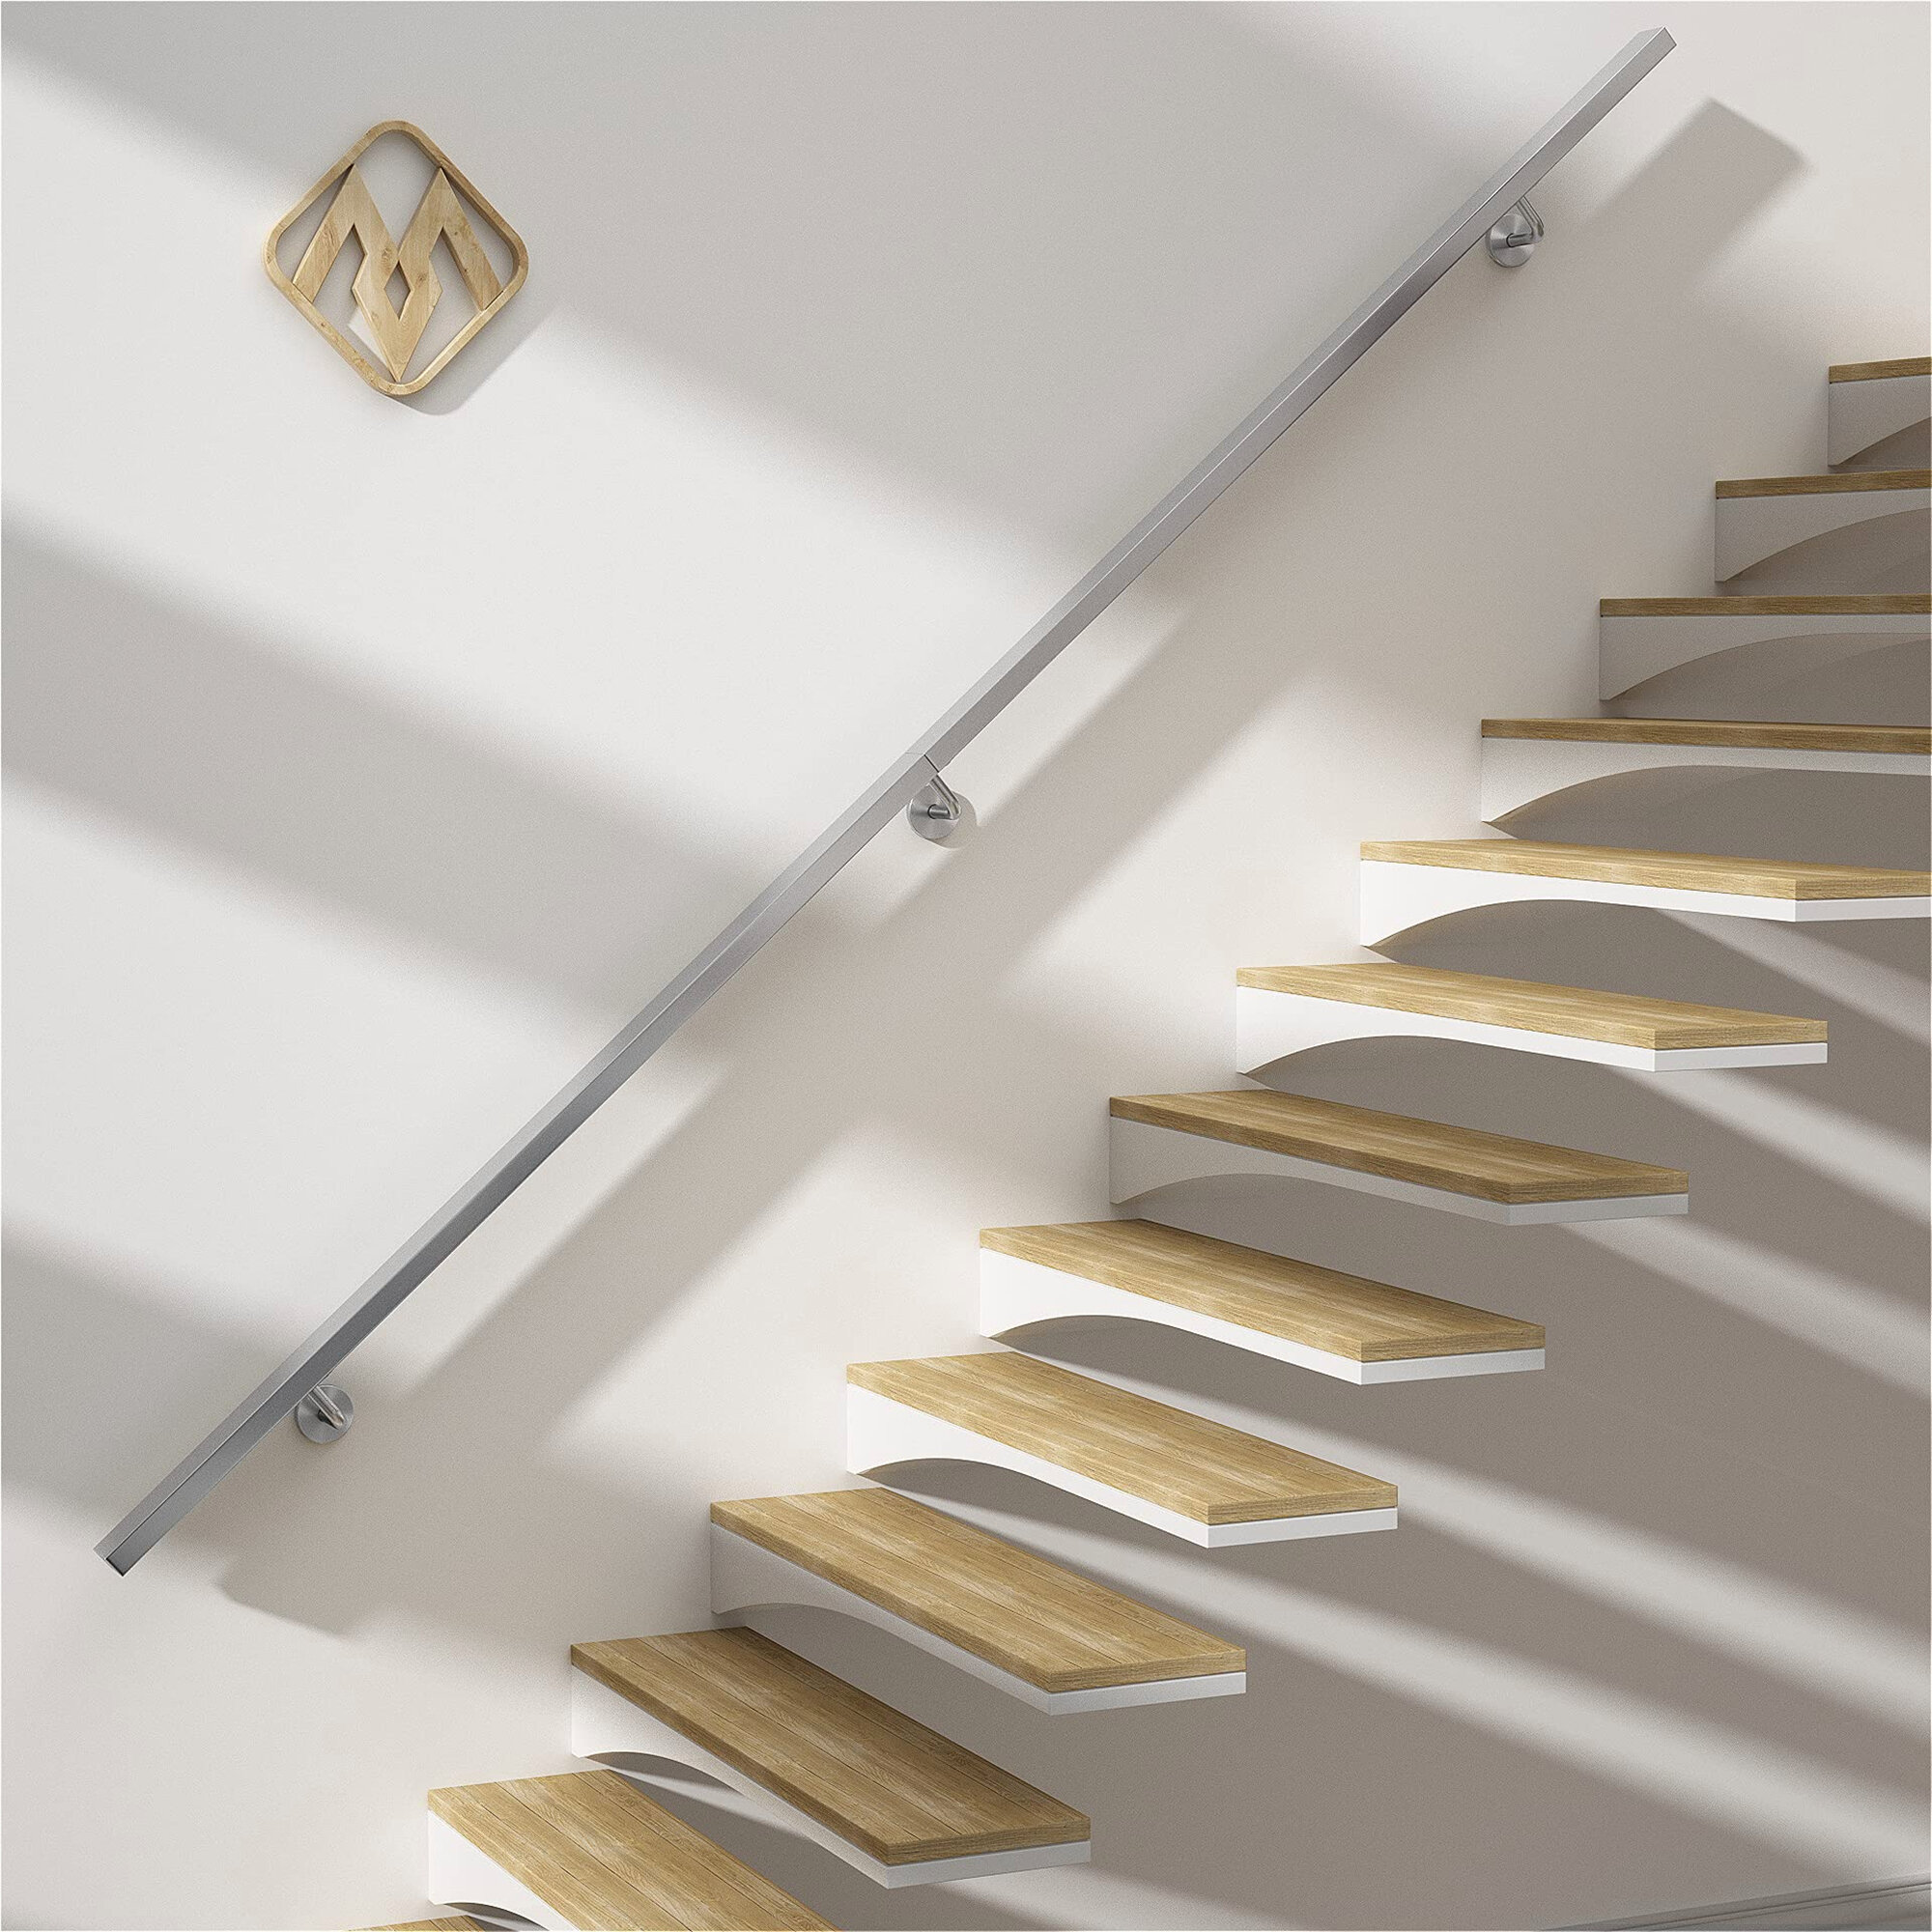 Stair Handrail Stainless Steel Grab Wall Rail Bannister Staircase Indoor Railing 